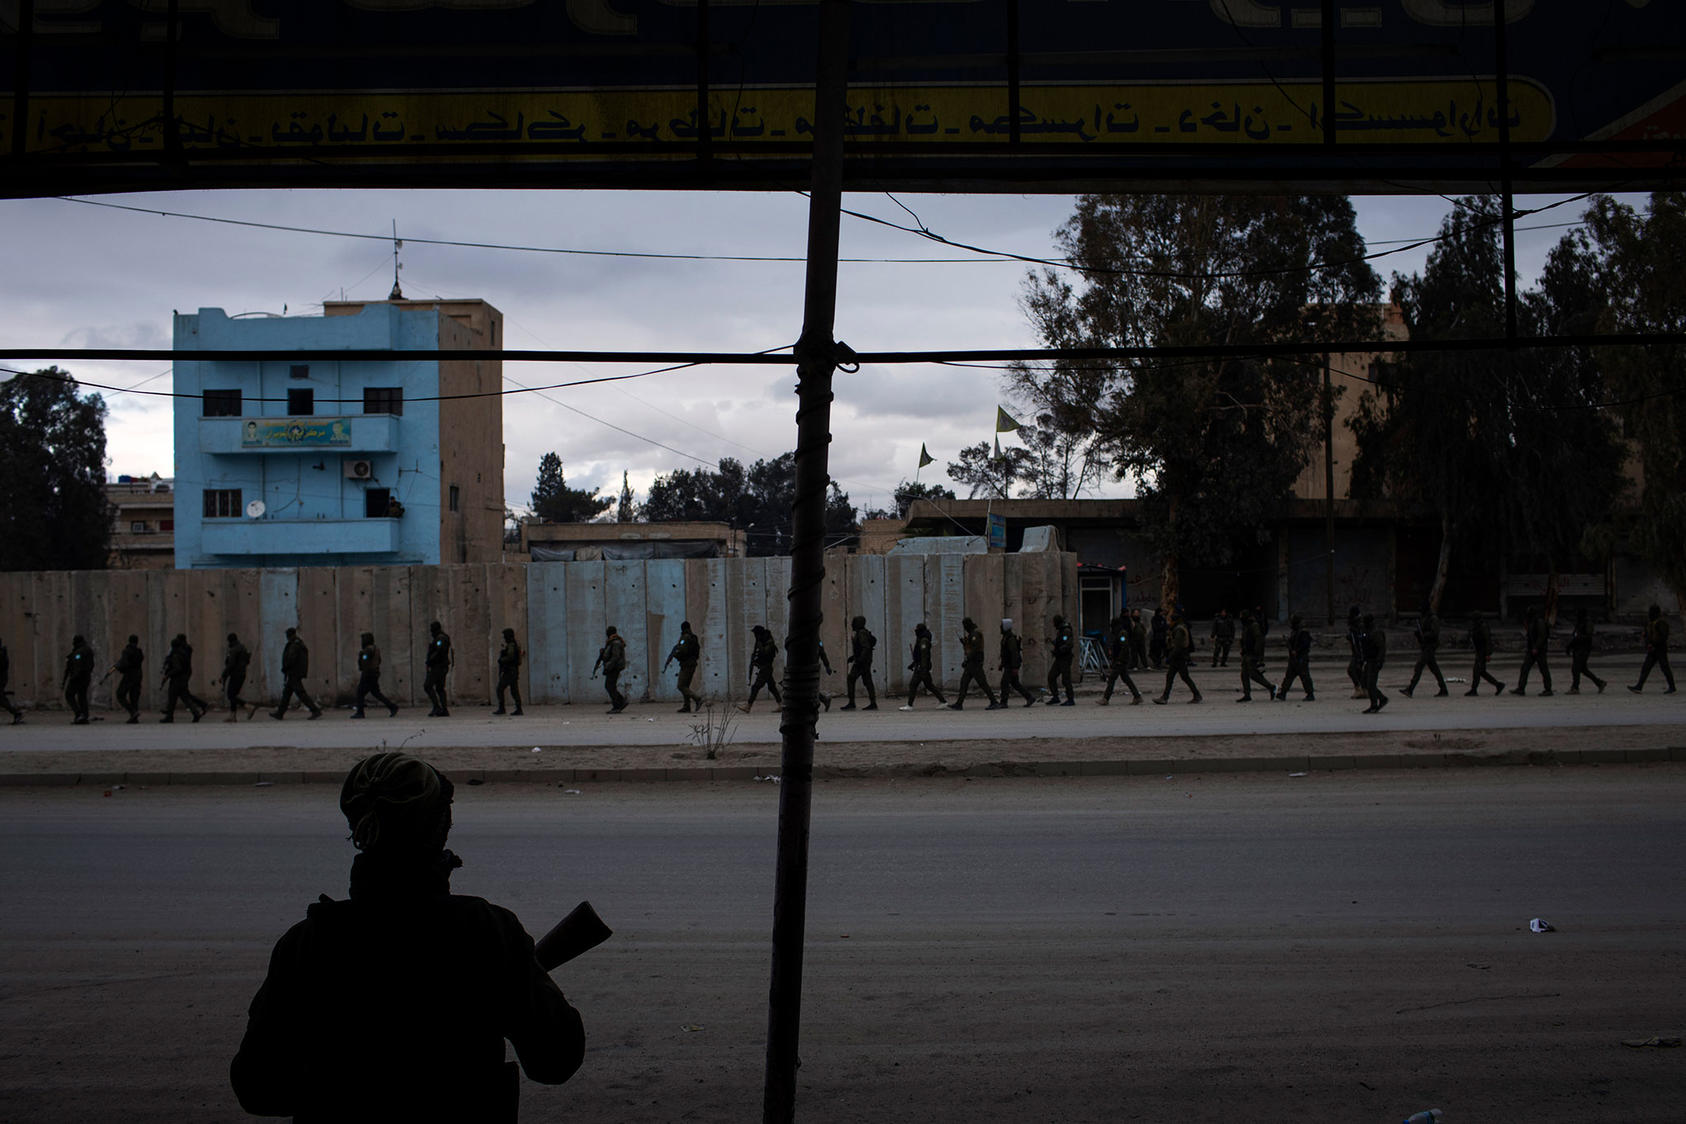 Kurdish security forces searched for escaped prisoners and Islamic State fighters on Thursday, Jan. 27, 2022, near a prison that was attacked last week in Hasakeh, Syria. (Diego Ibarra Sanchez/The New York Times)